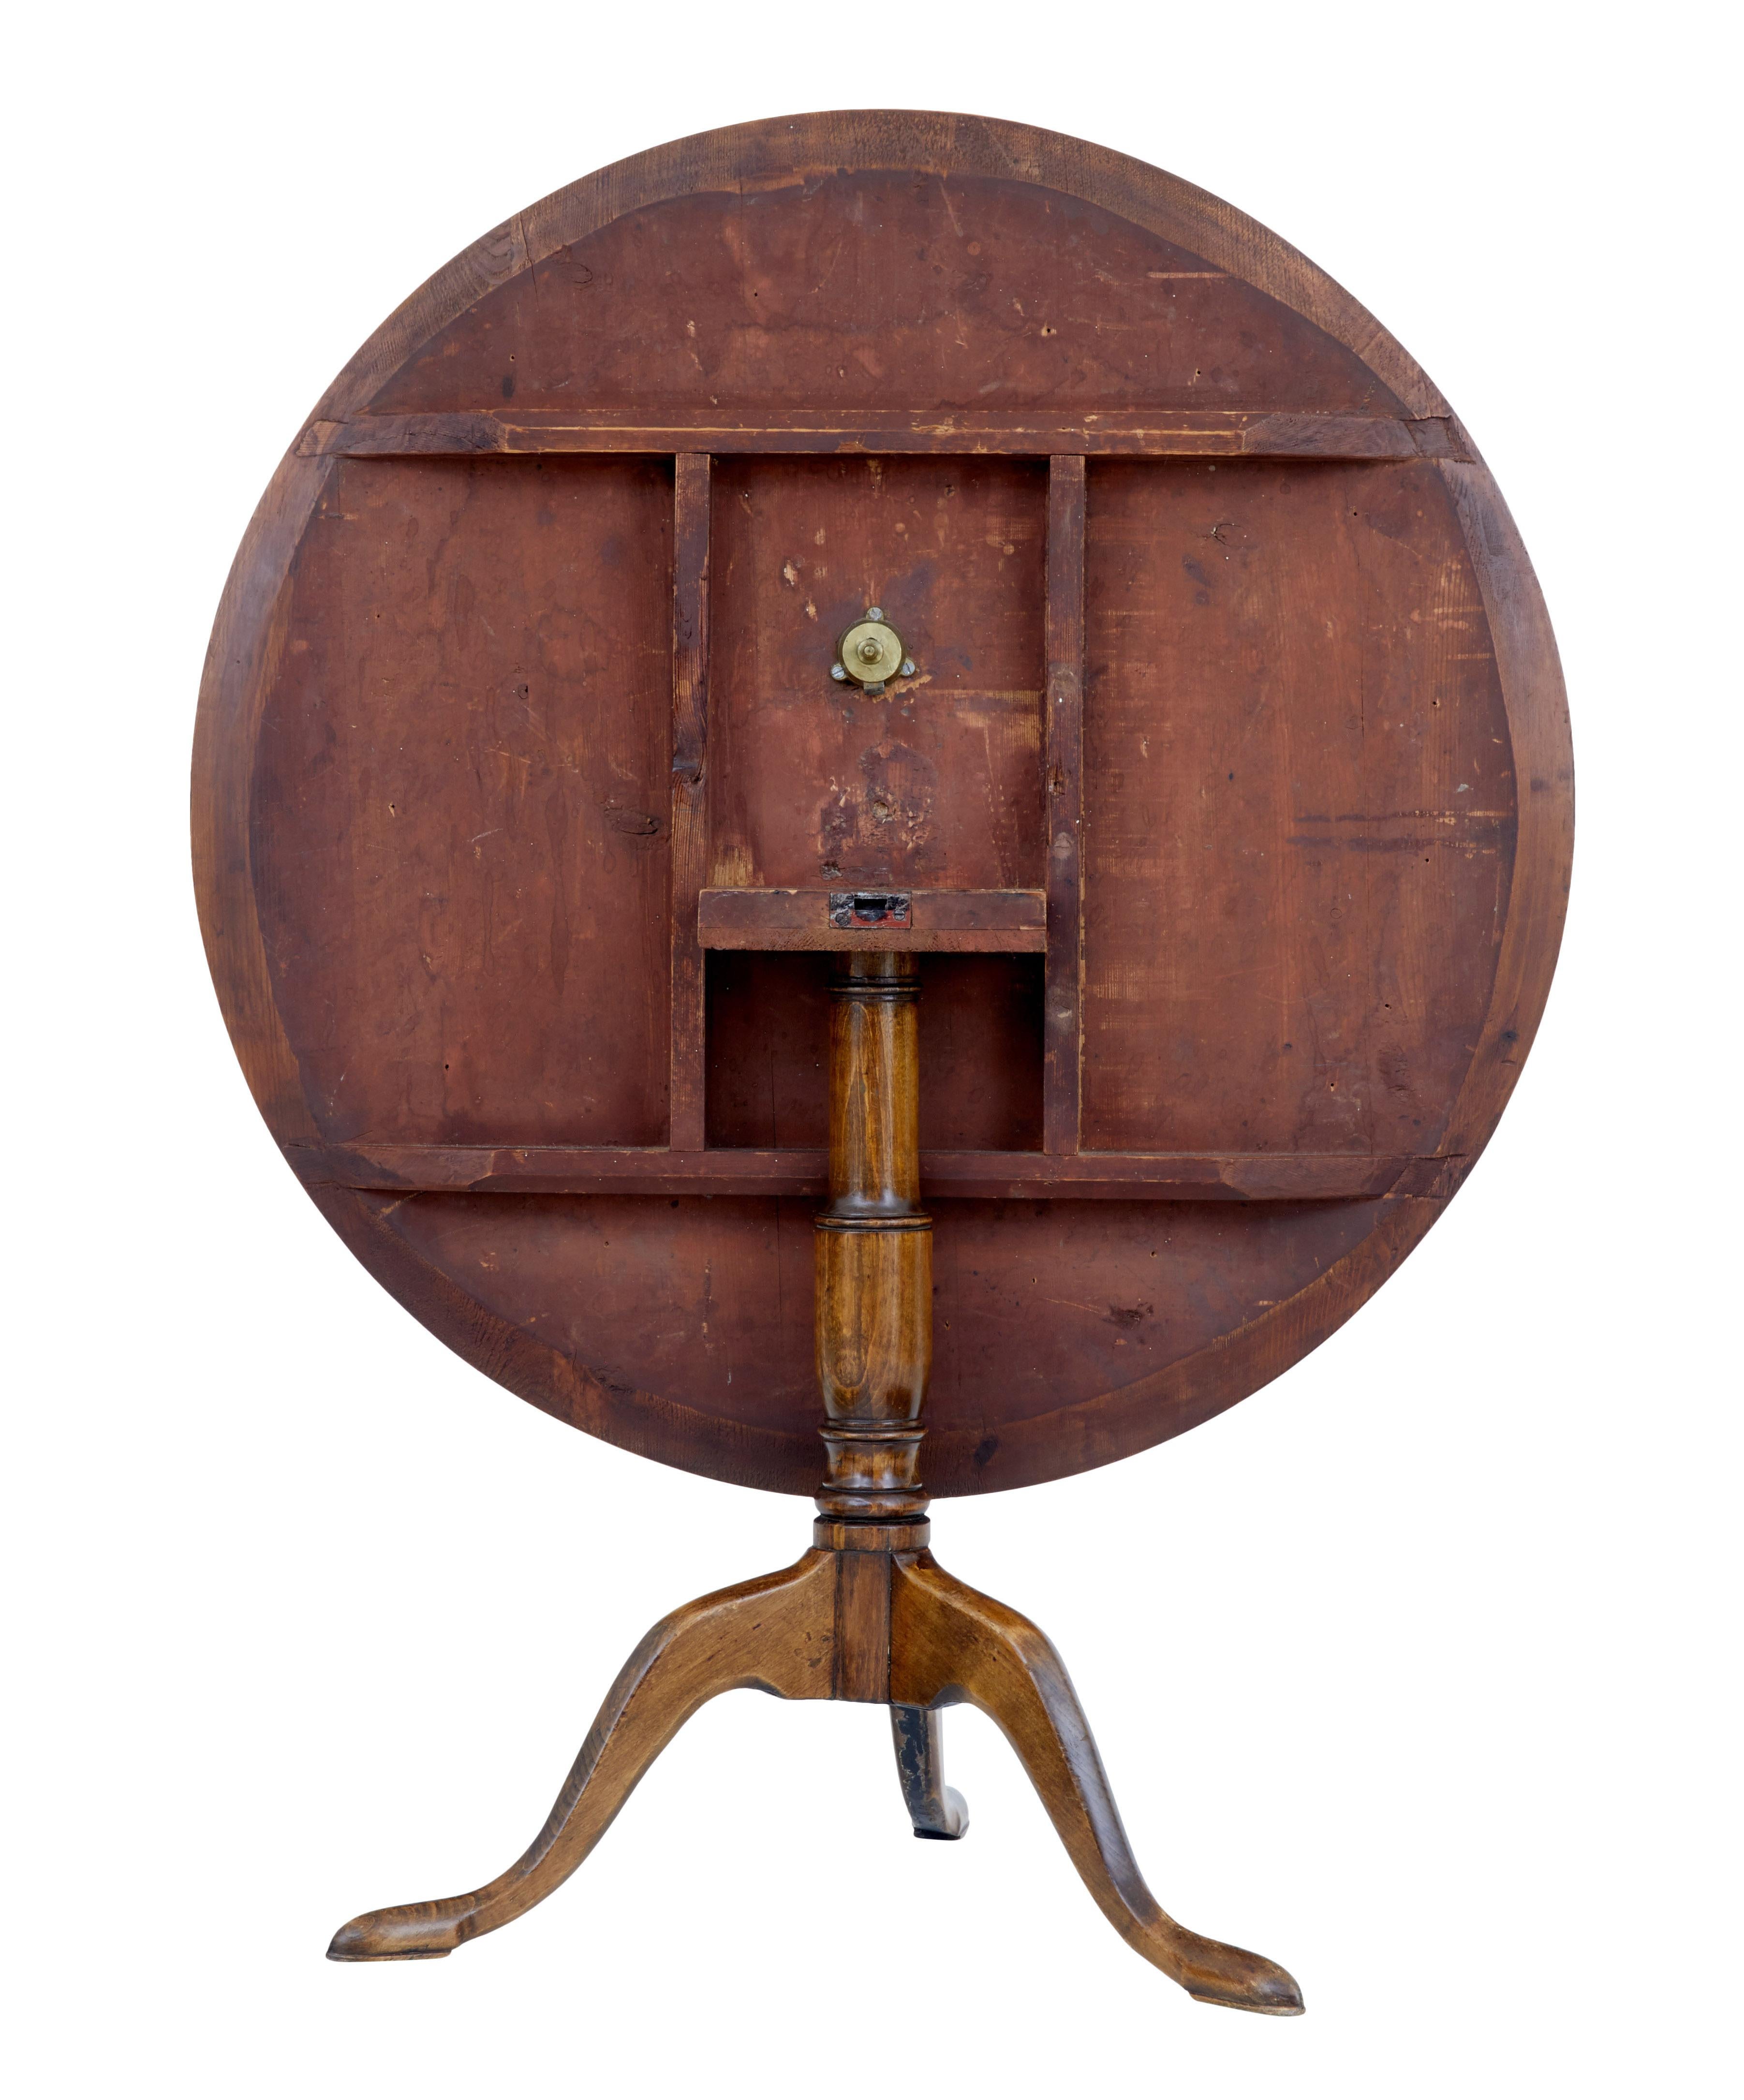 Fine quality mid-19th century Swedish tilt top table circa 1860.

Circular top beautifully veneered in striking alder root. Supported by birch turned stem and 3 legs, terminating on pad foot.

Multiple uses for this practical piece of